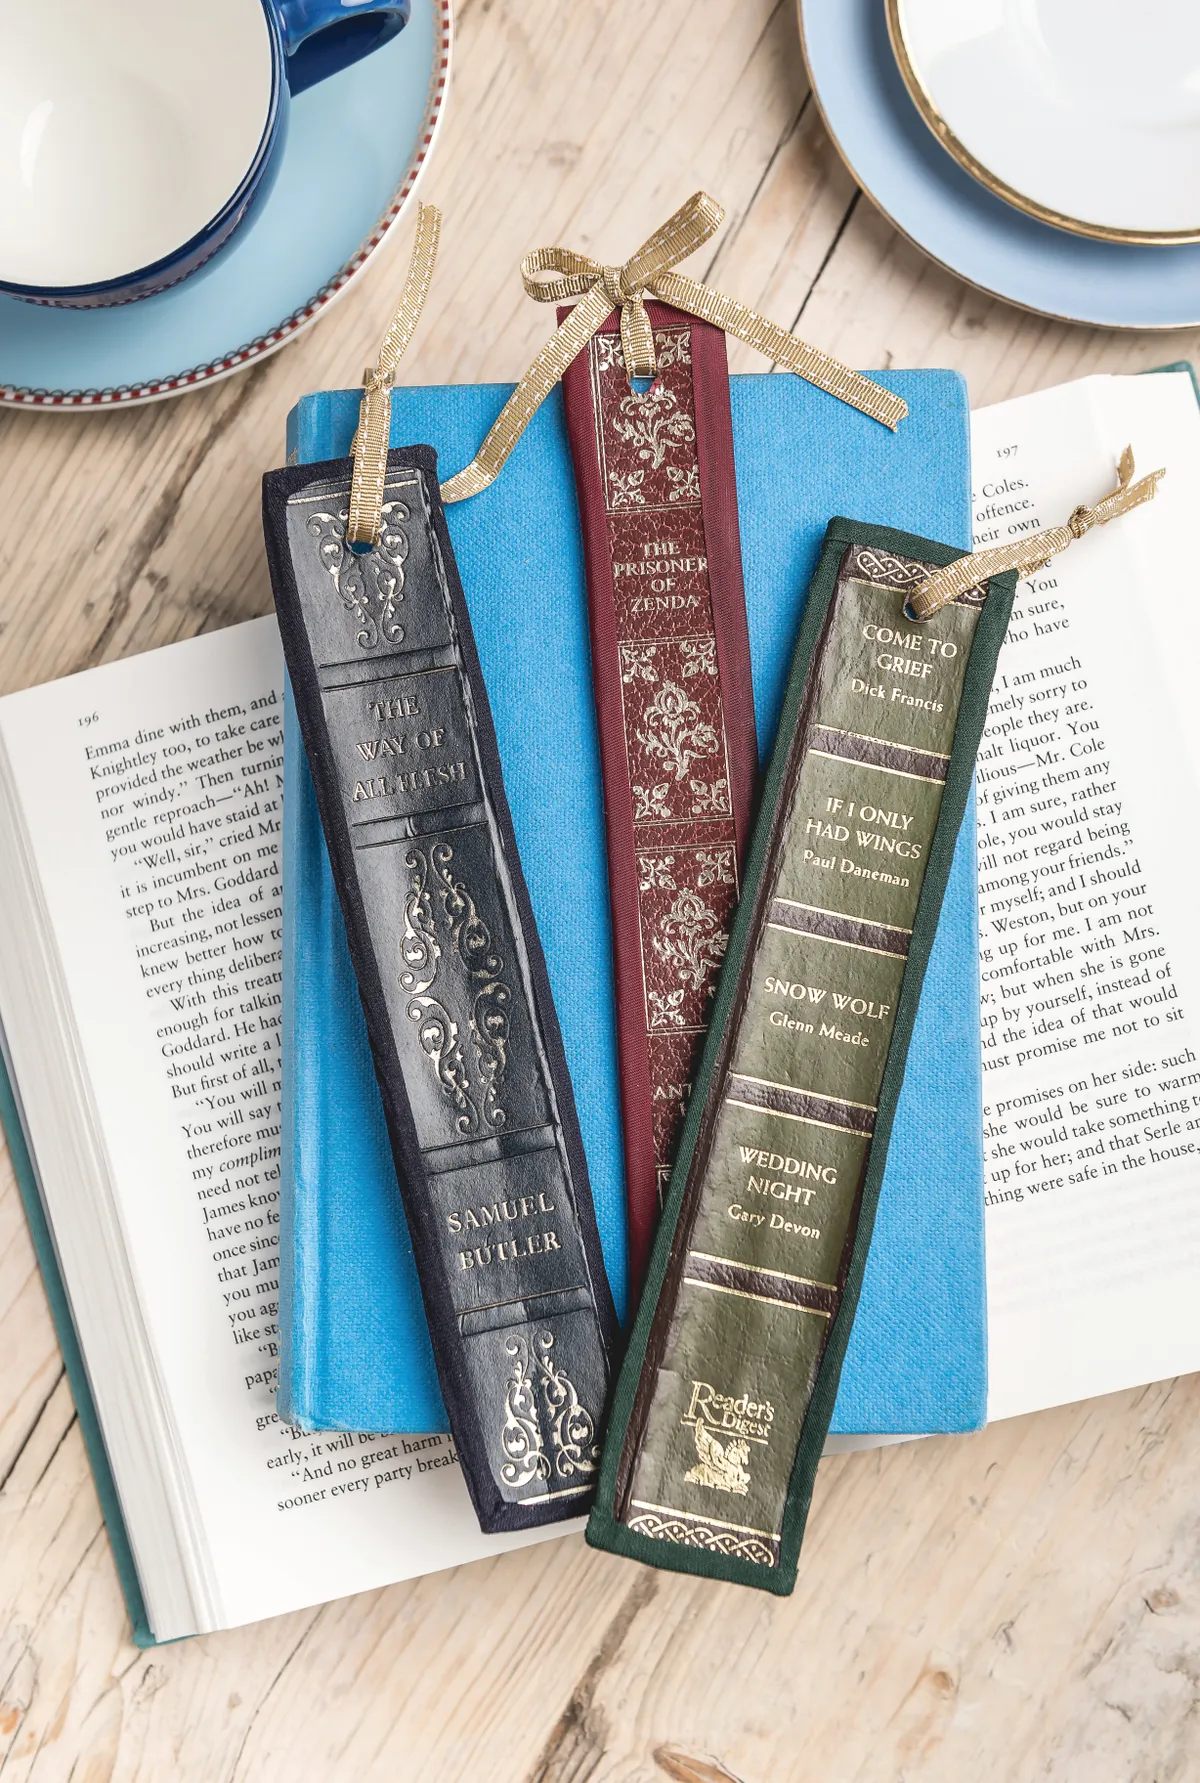 Creating Bookmarks for Charity - Try It - Like It - Create it